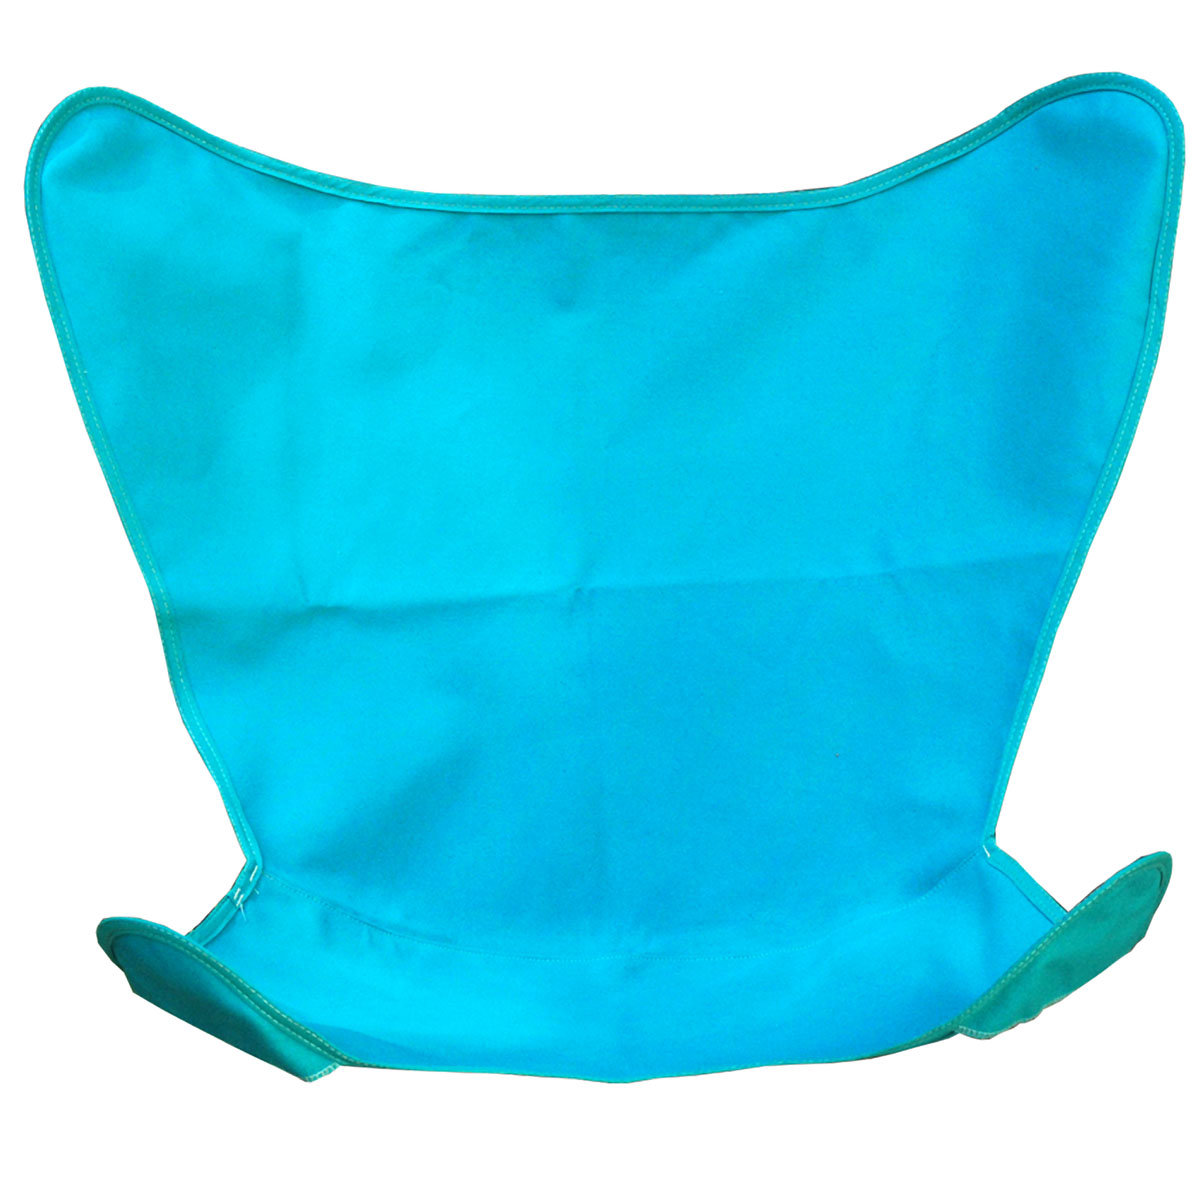 Replacement Cover for Butterfly Chair - Teal